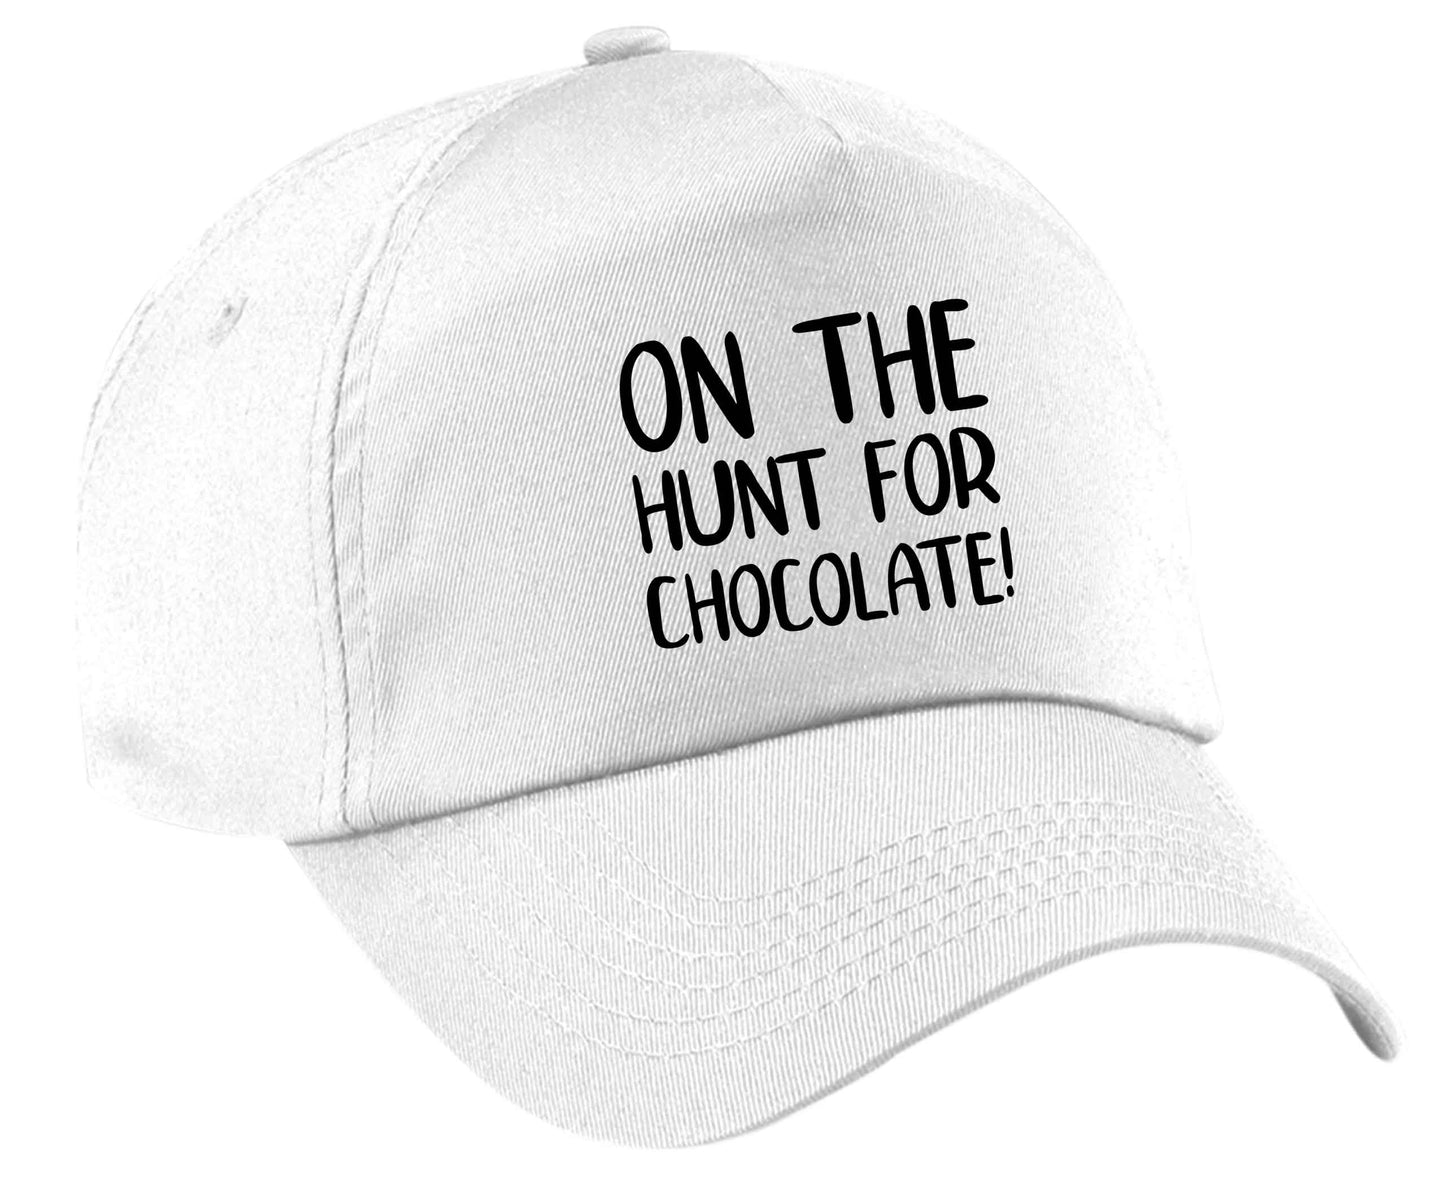 On the hunt for chocolate! baseball cap